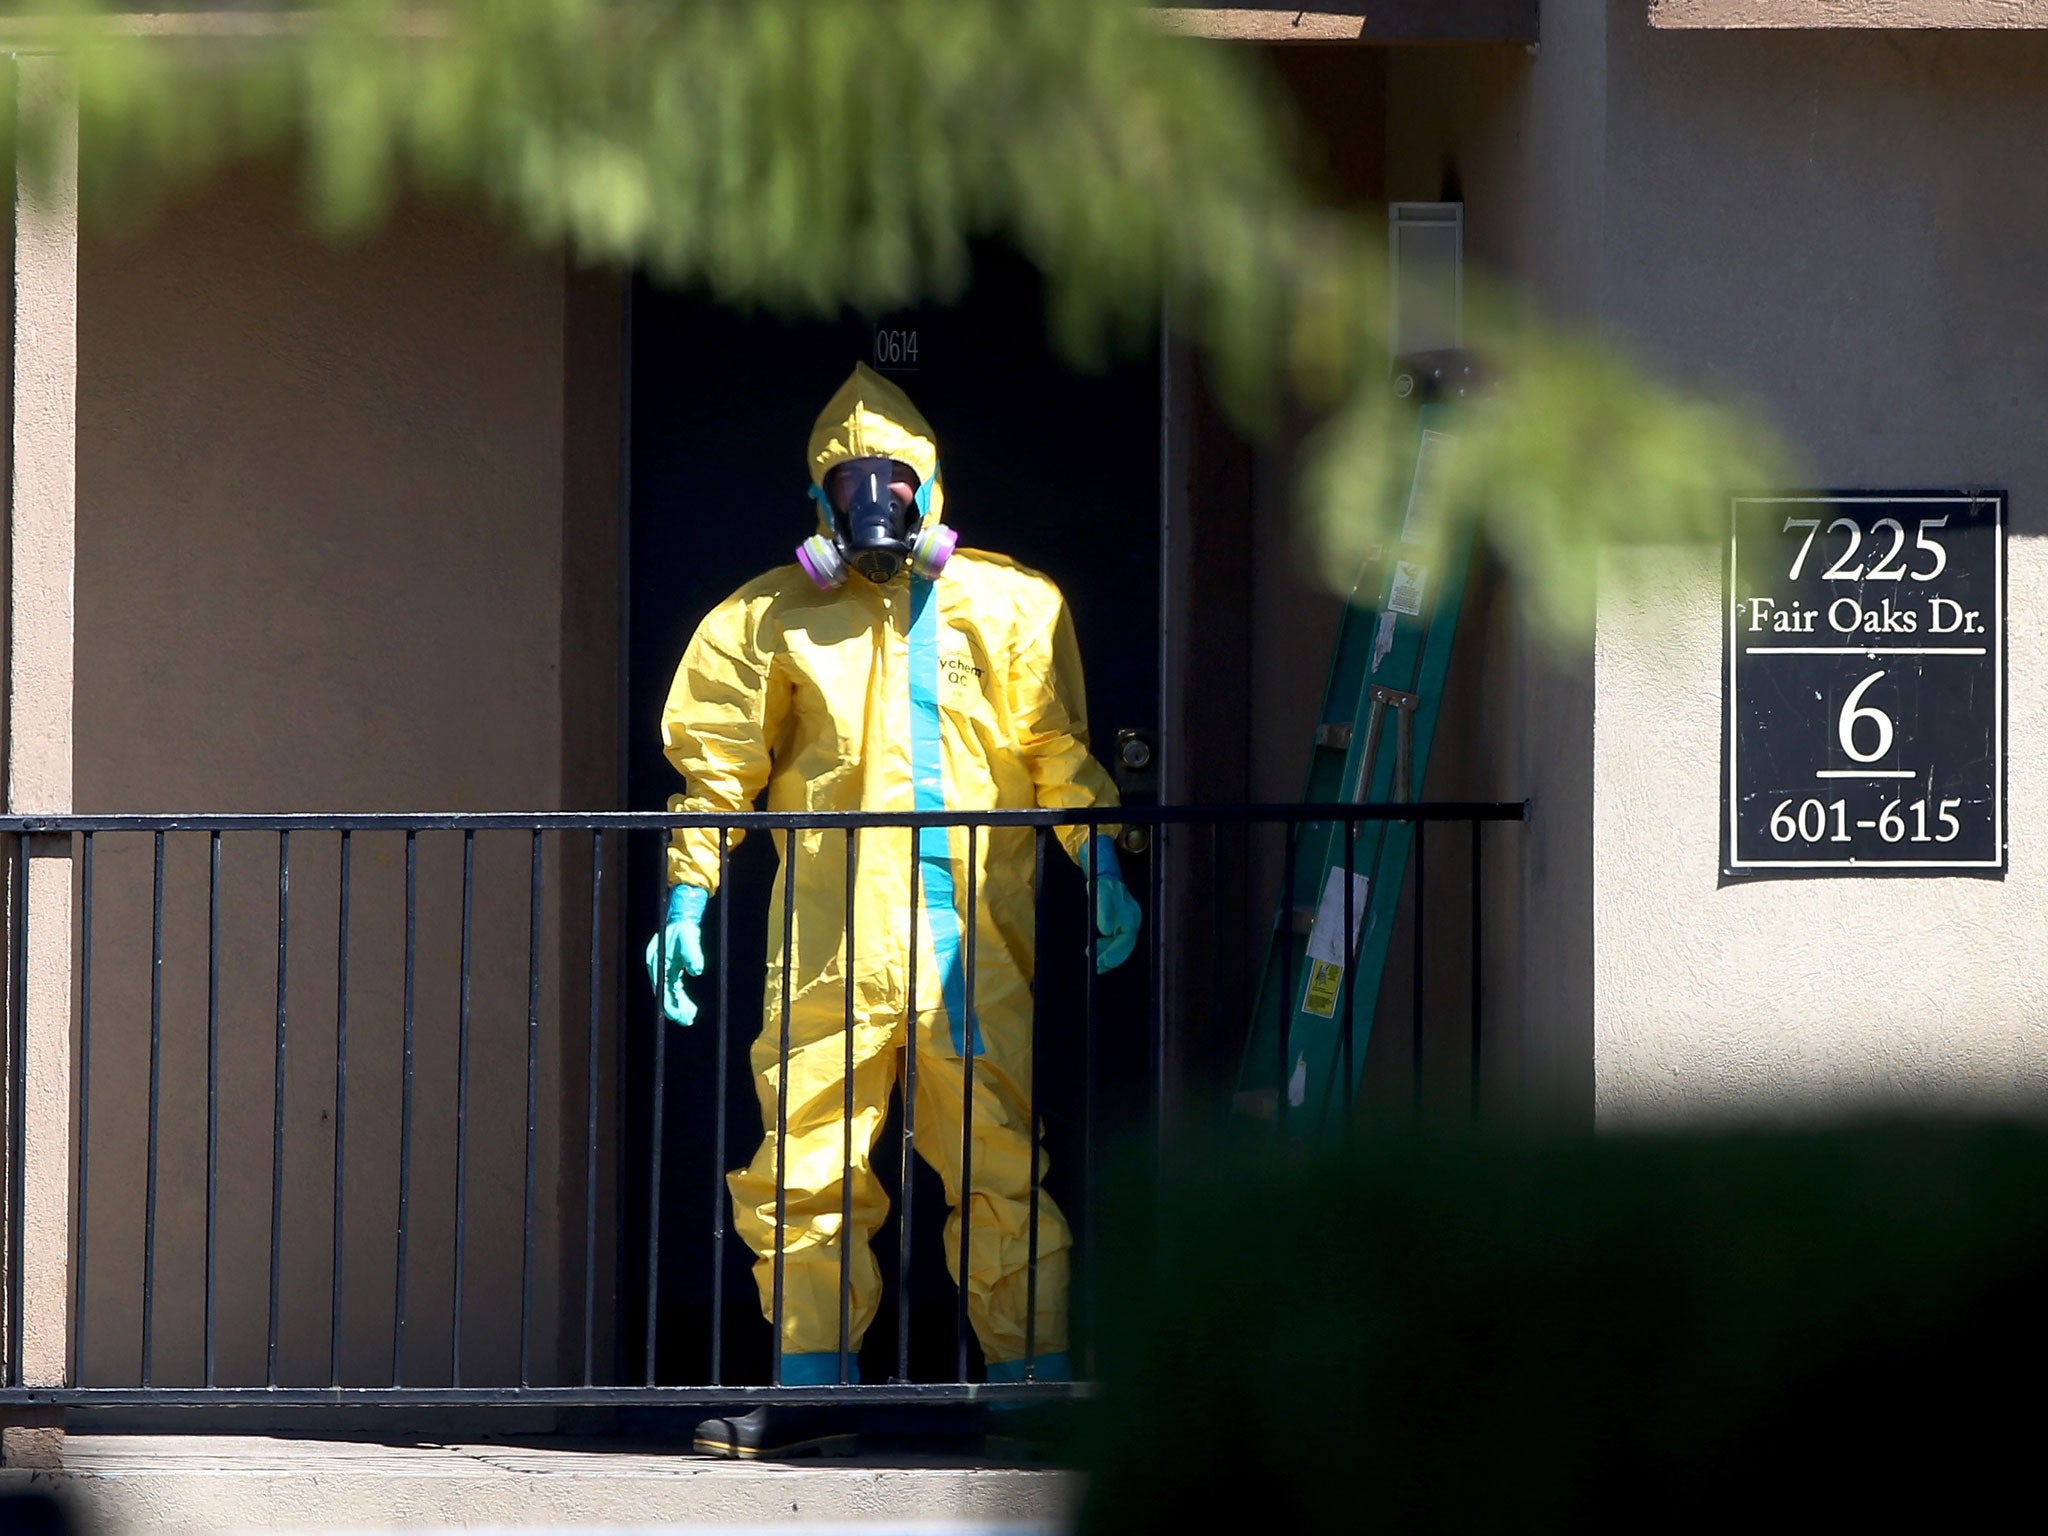 A hazmat team member arrives to clean a unit at the Ivy Apartments, where the confirmed Ebola virus patient was staying, on October 3, 2014 in Dallas, Texas.